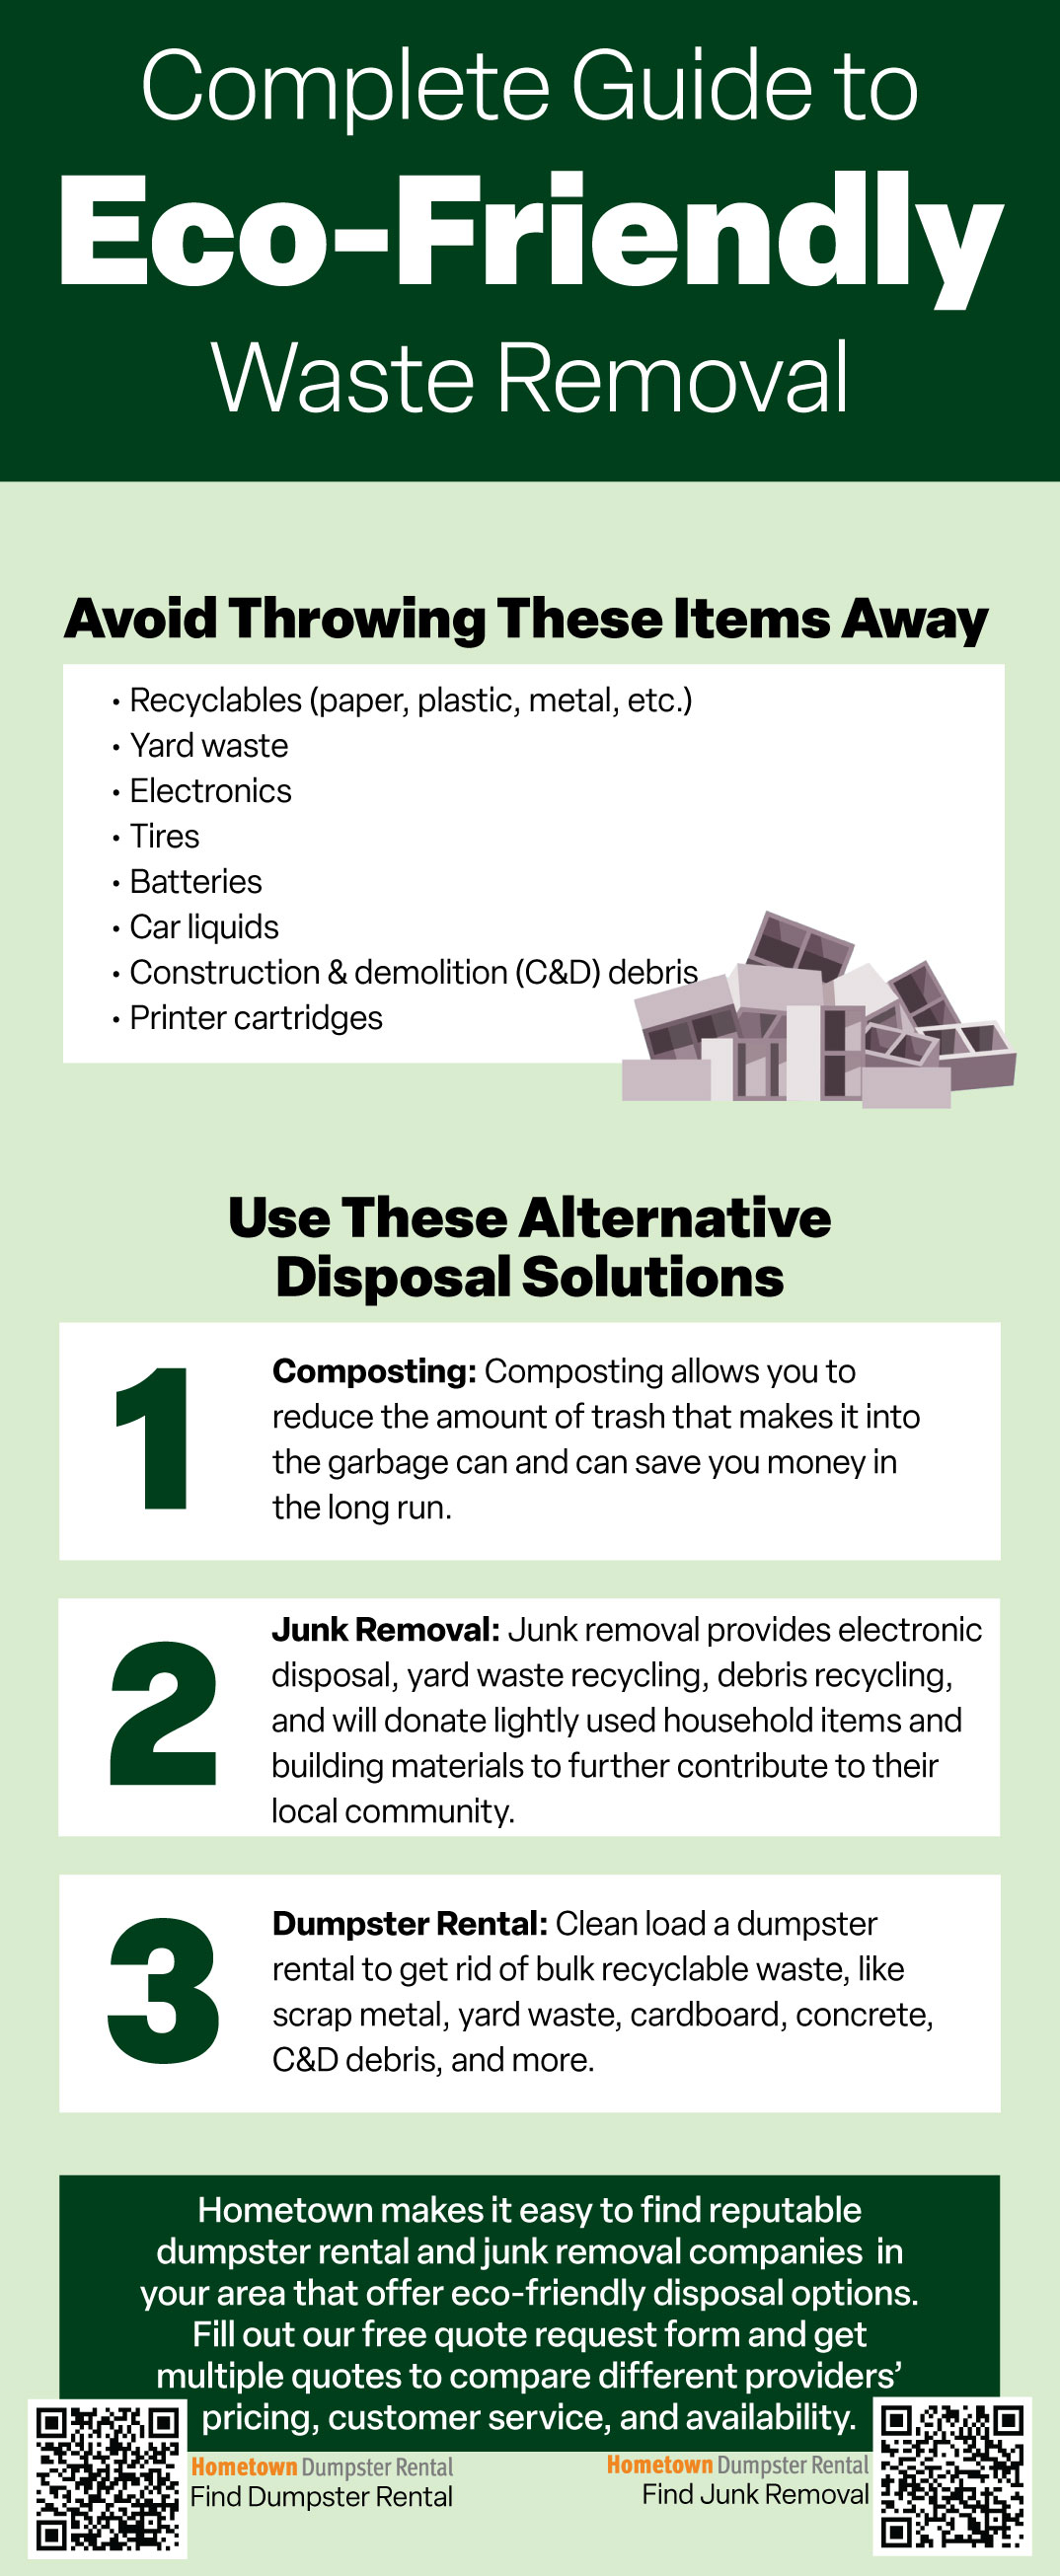 Complete Guide to Eco-Friendly Waste Removal Infographic